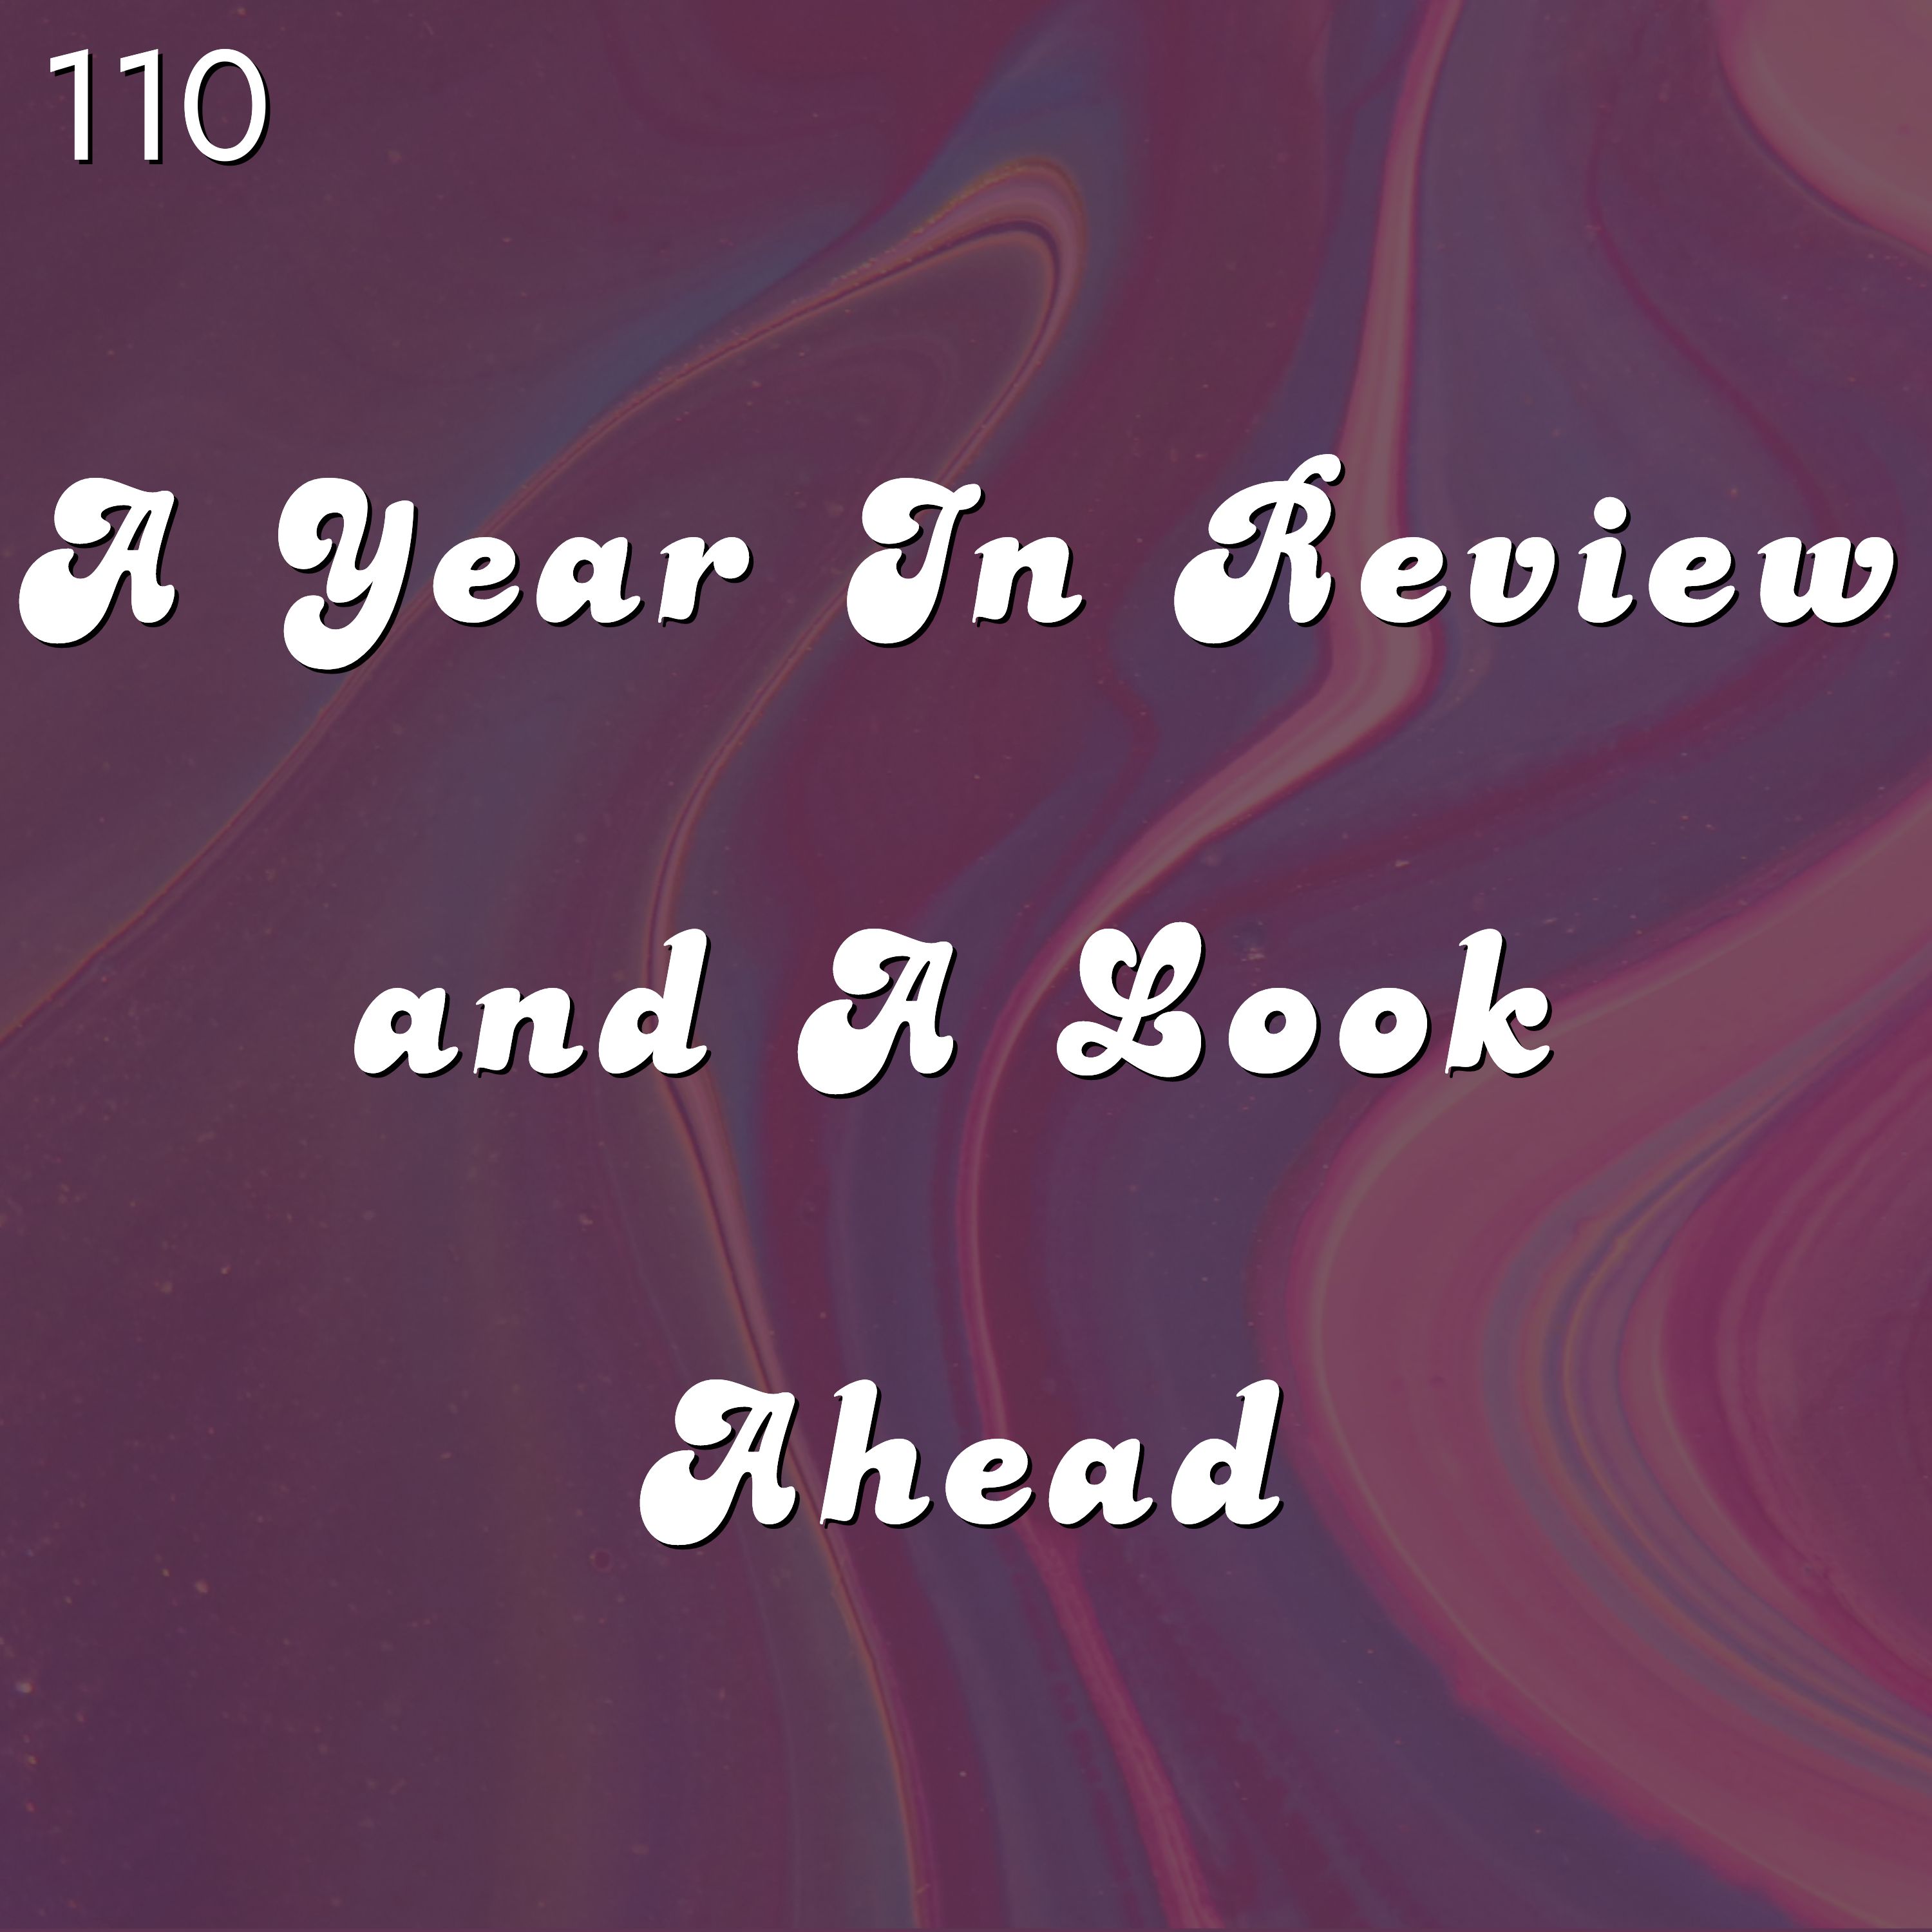 #110 - A Year In Review and A Look Ahead